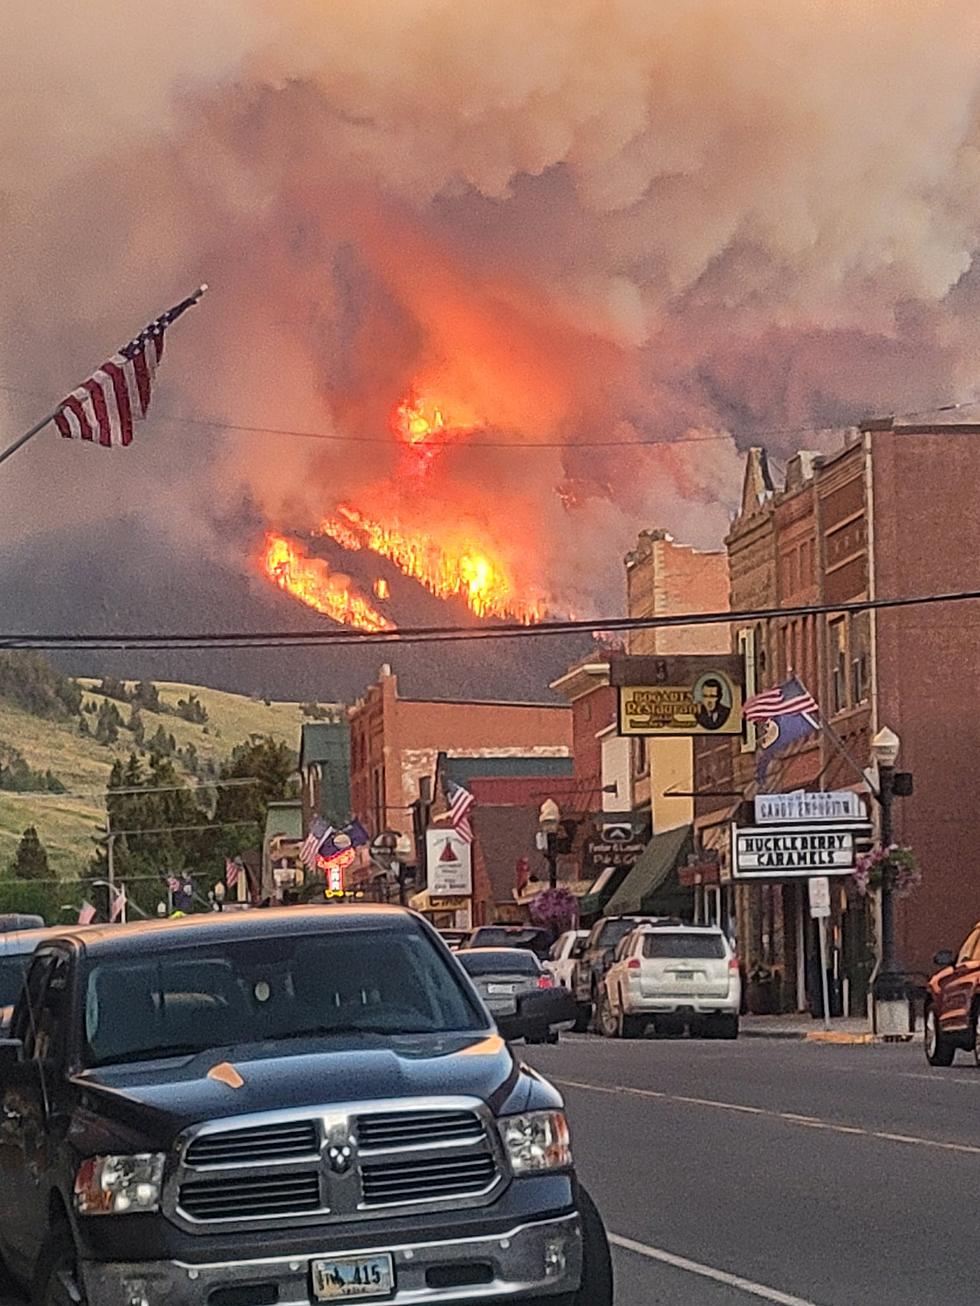 Popular Montana Ski Town Being Evacuated Due to Massive Wildfire